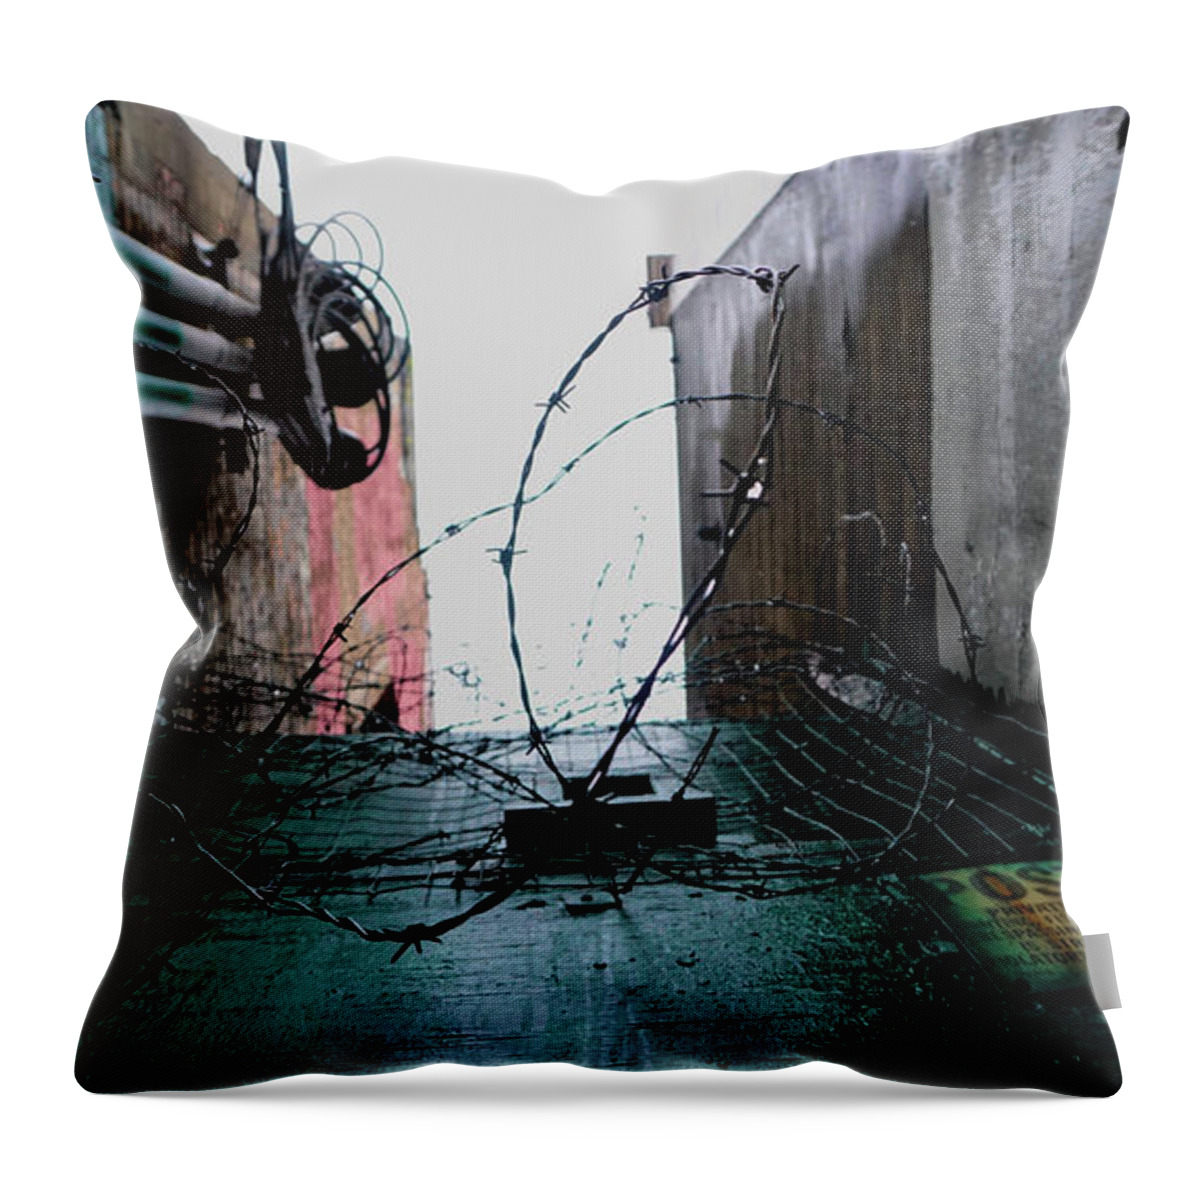 Seattle Throw Pillow featuring the photograph Barbed Wire City Scene by Cathy Anderson